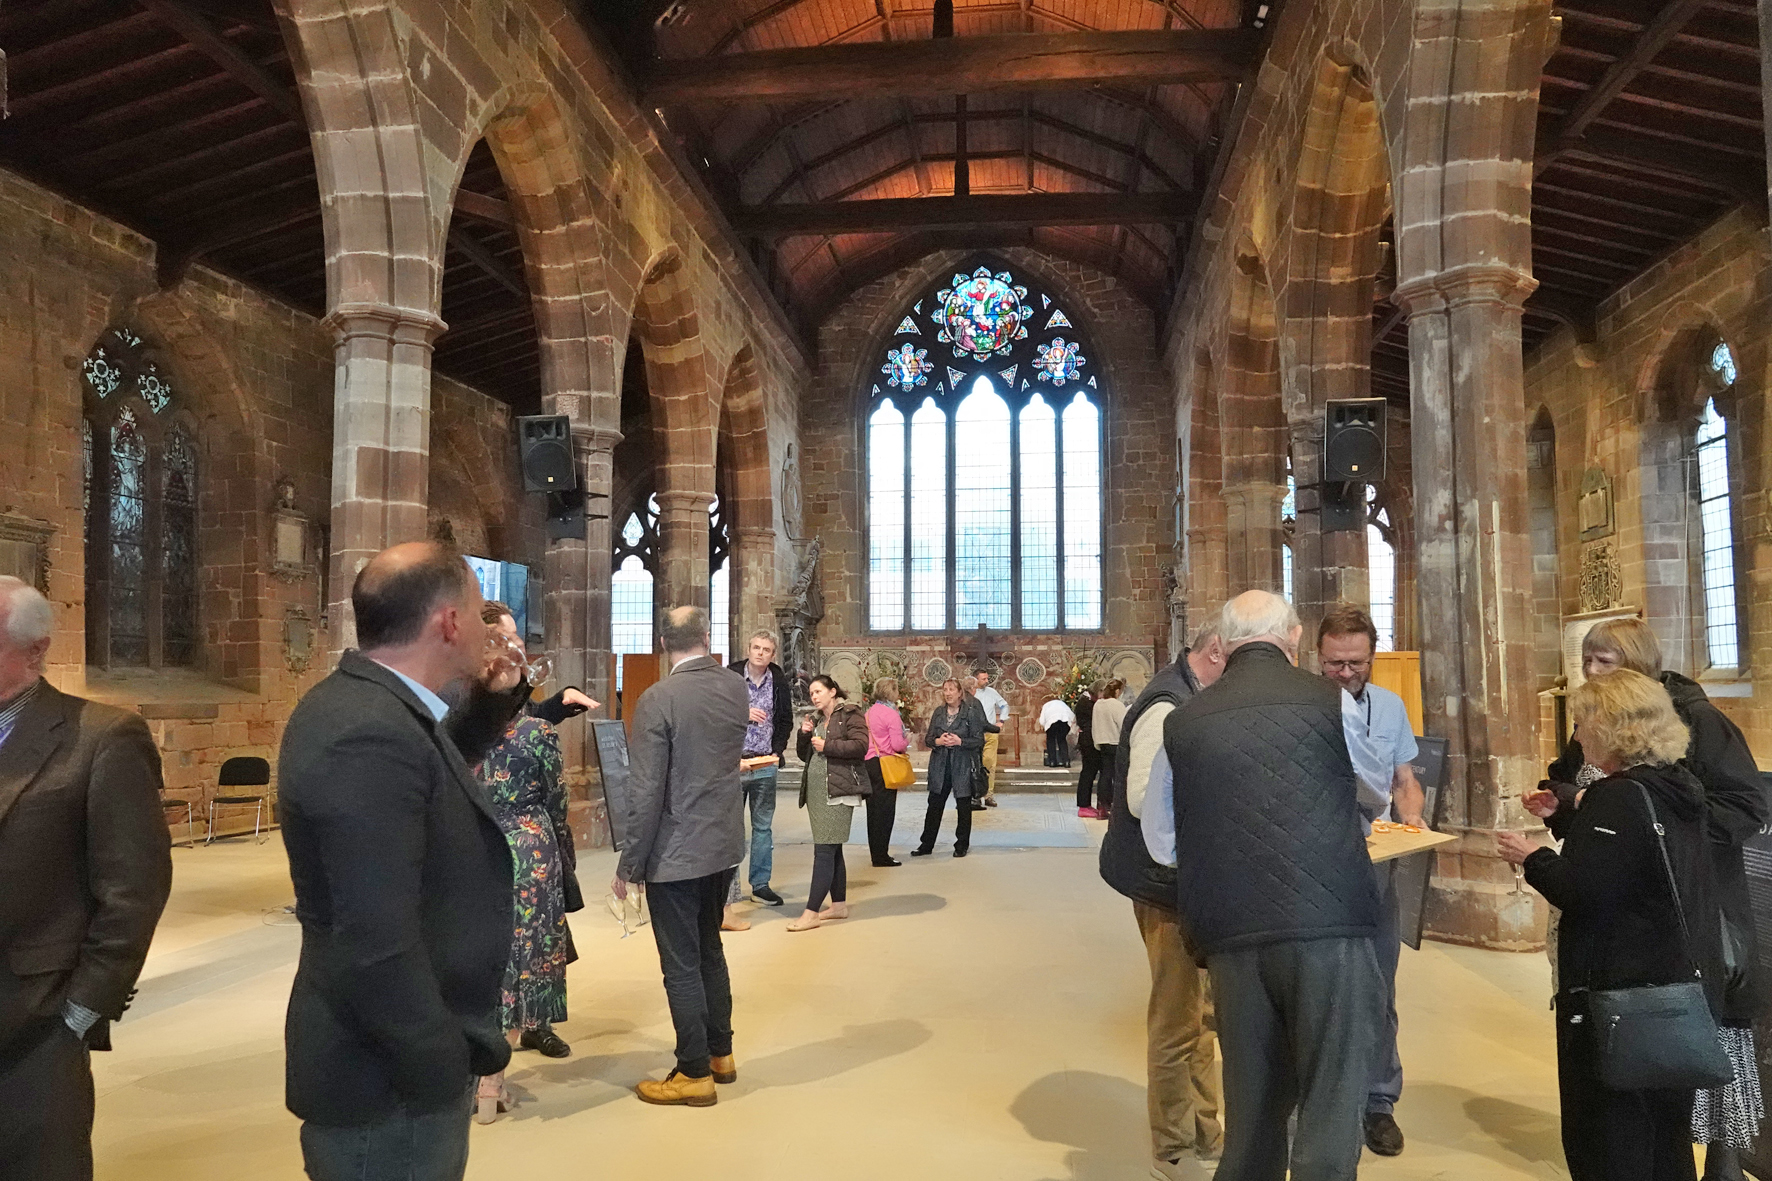 People chatting inside St Helen's Church on the reopening evening.